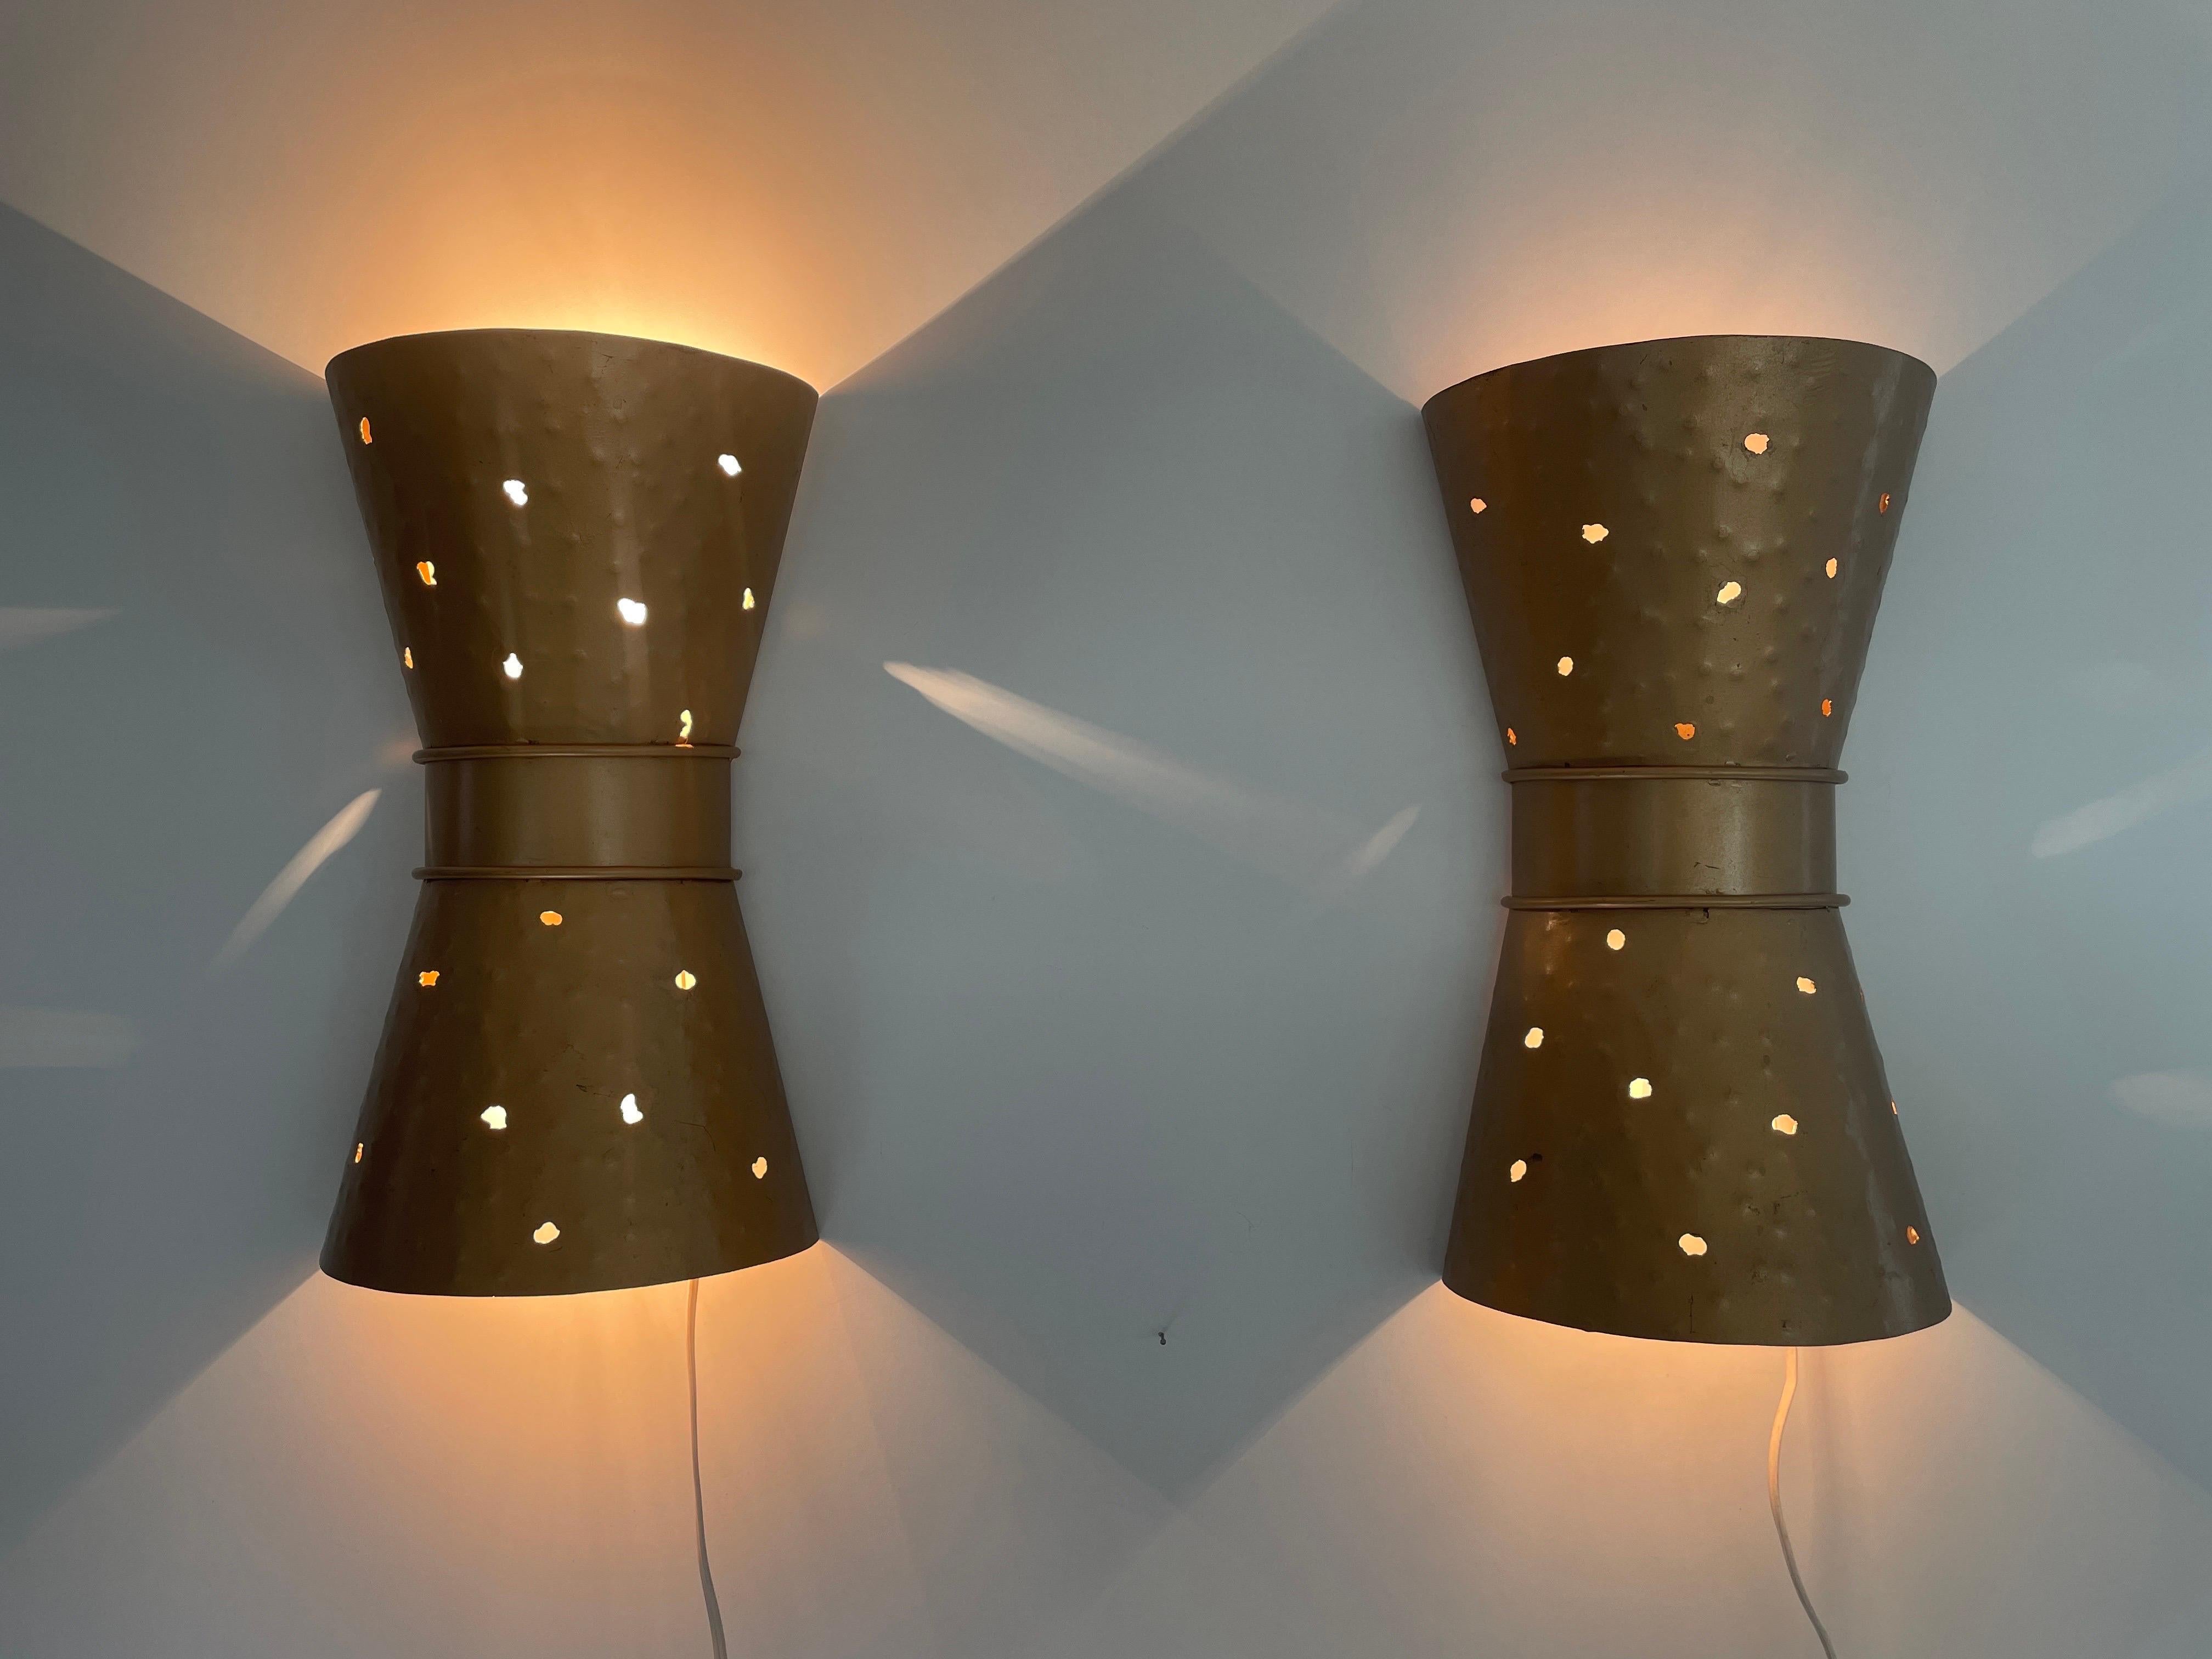 Diabolo Style Design Hand-crafted Pair of Sconces, 1970s, Germany For Sale 5